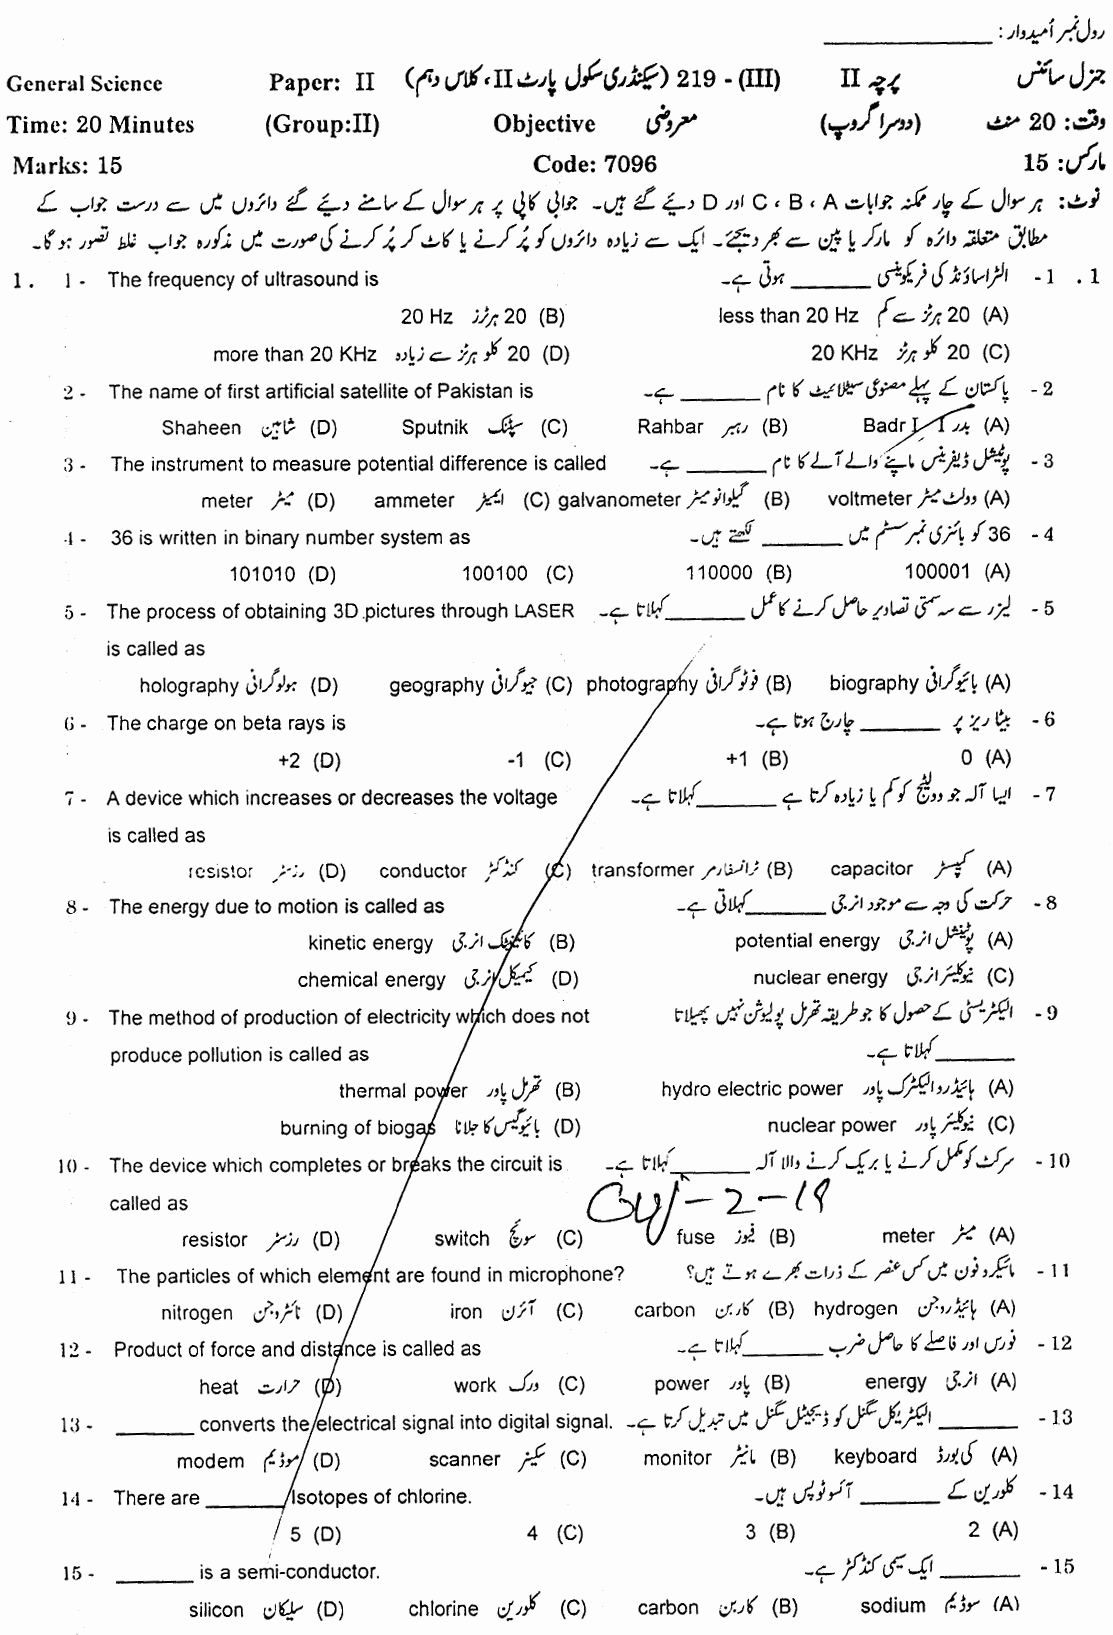 10th Class General Science Paper 2019 Gujranwala Board Objective Group 2